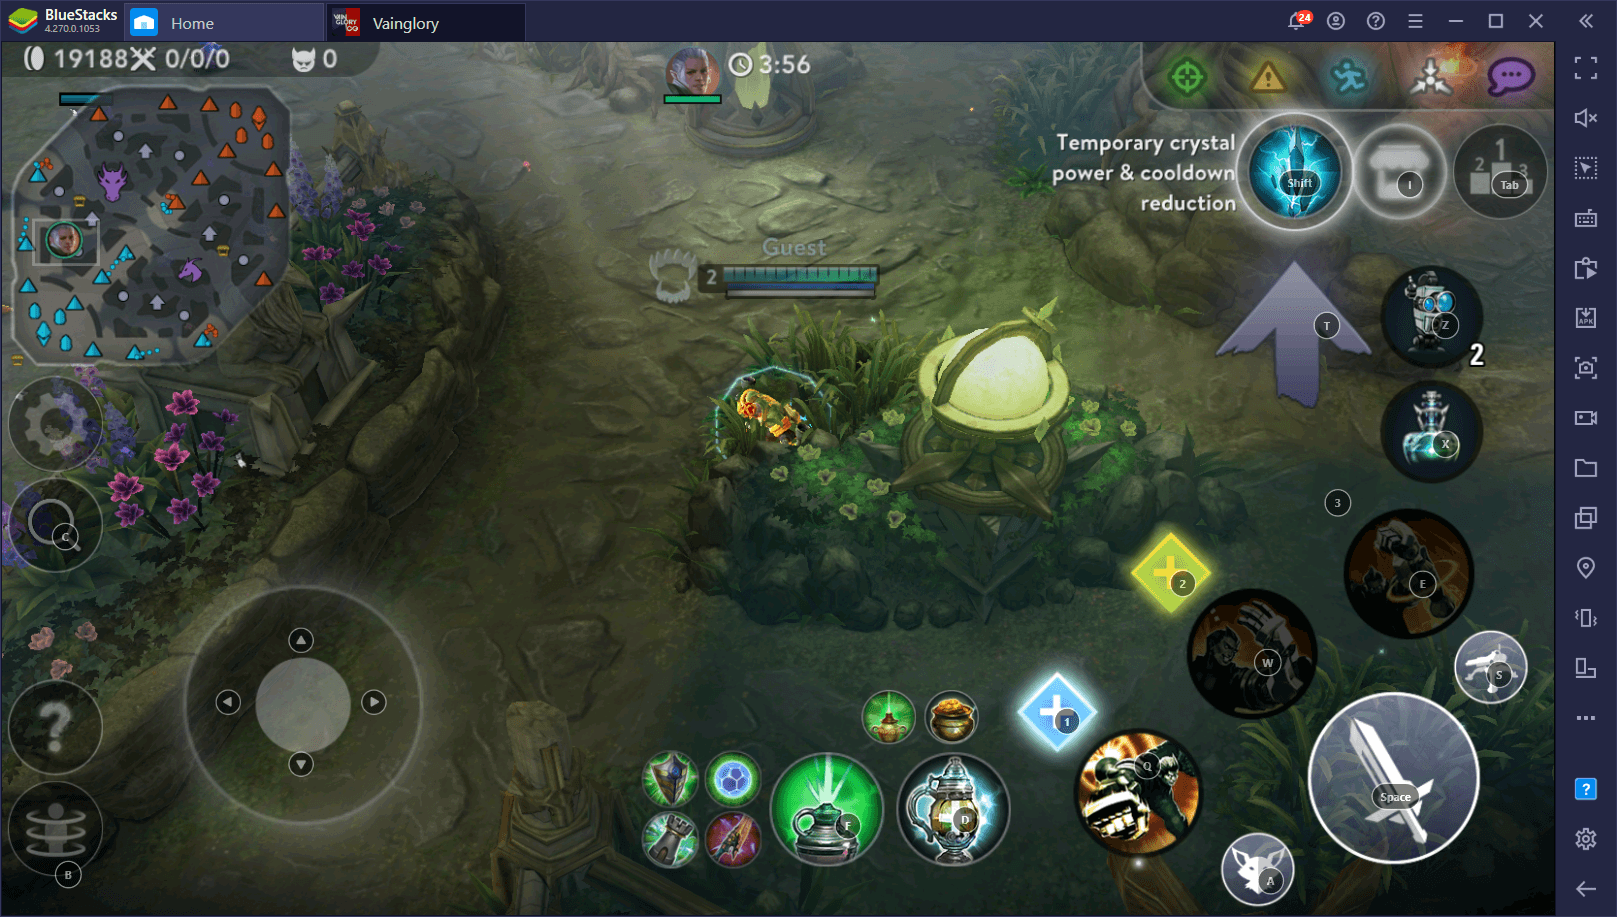 Vainglory - How to Use BlueStacks Features to Outplay Your Opponents